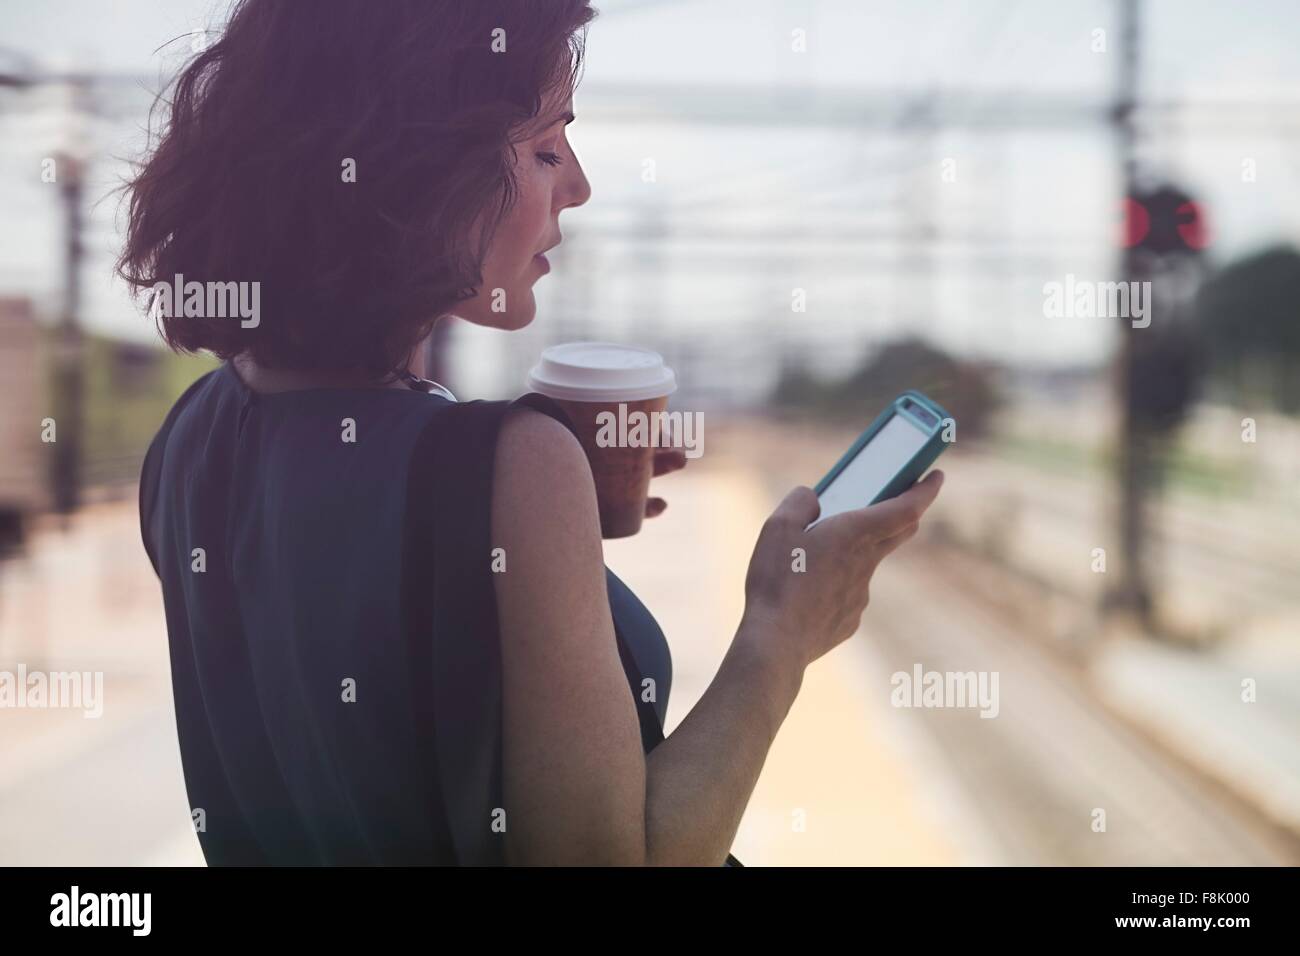 Mid adult woman waiting at train station, using smartphone, holding coffee cup Stock Photo